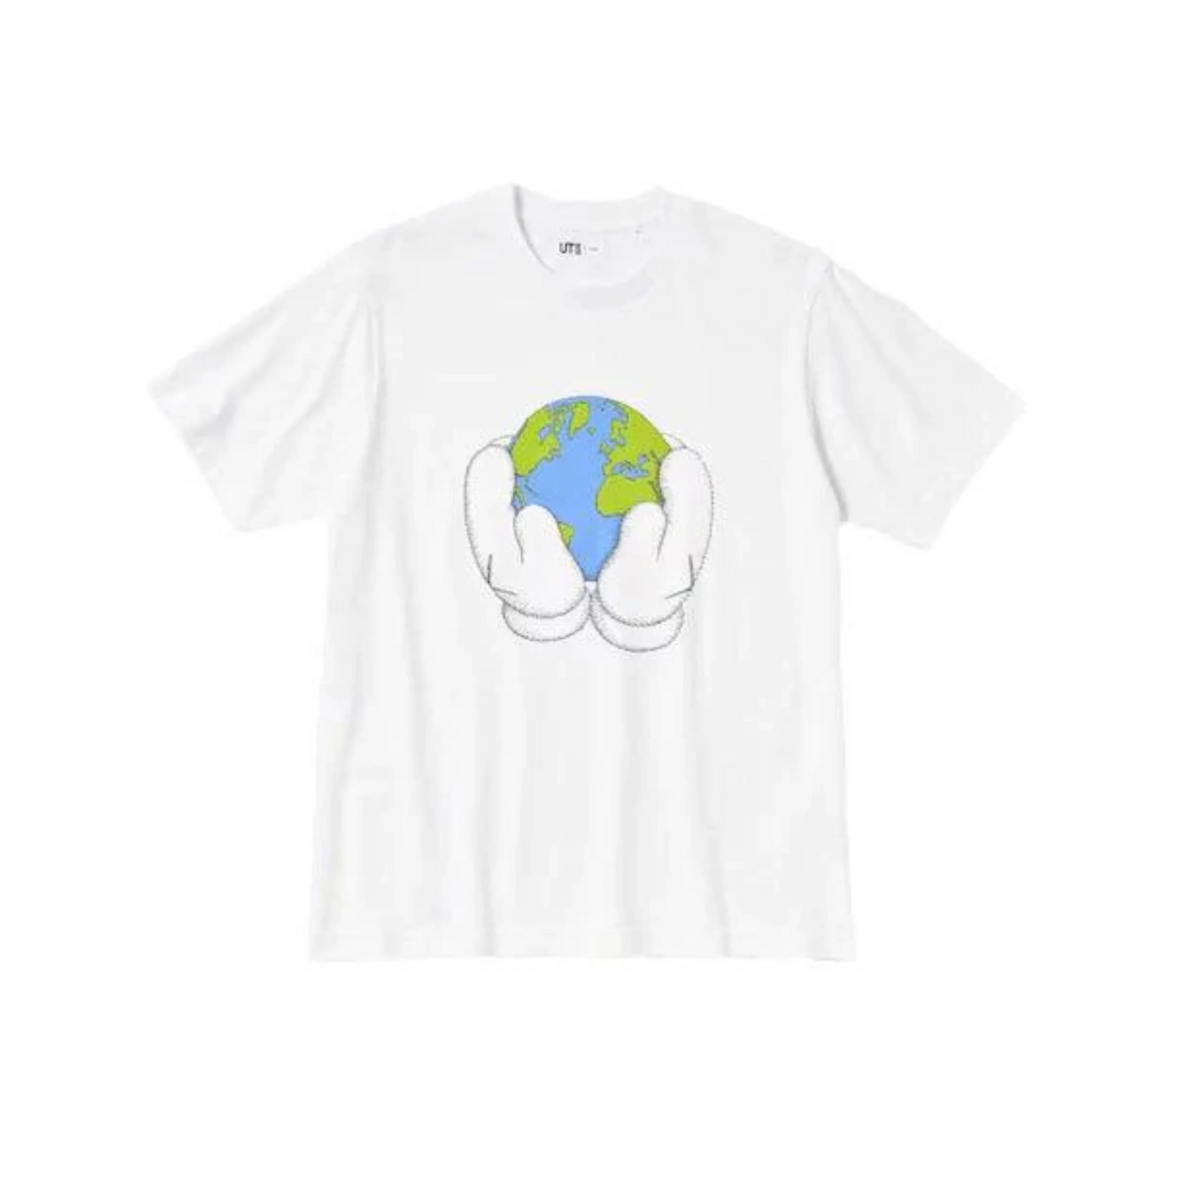 KAWS x Uniqlo Peace For All S/S Graphic T-shirt "White"